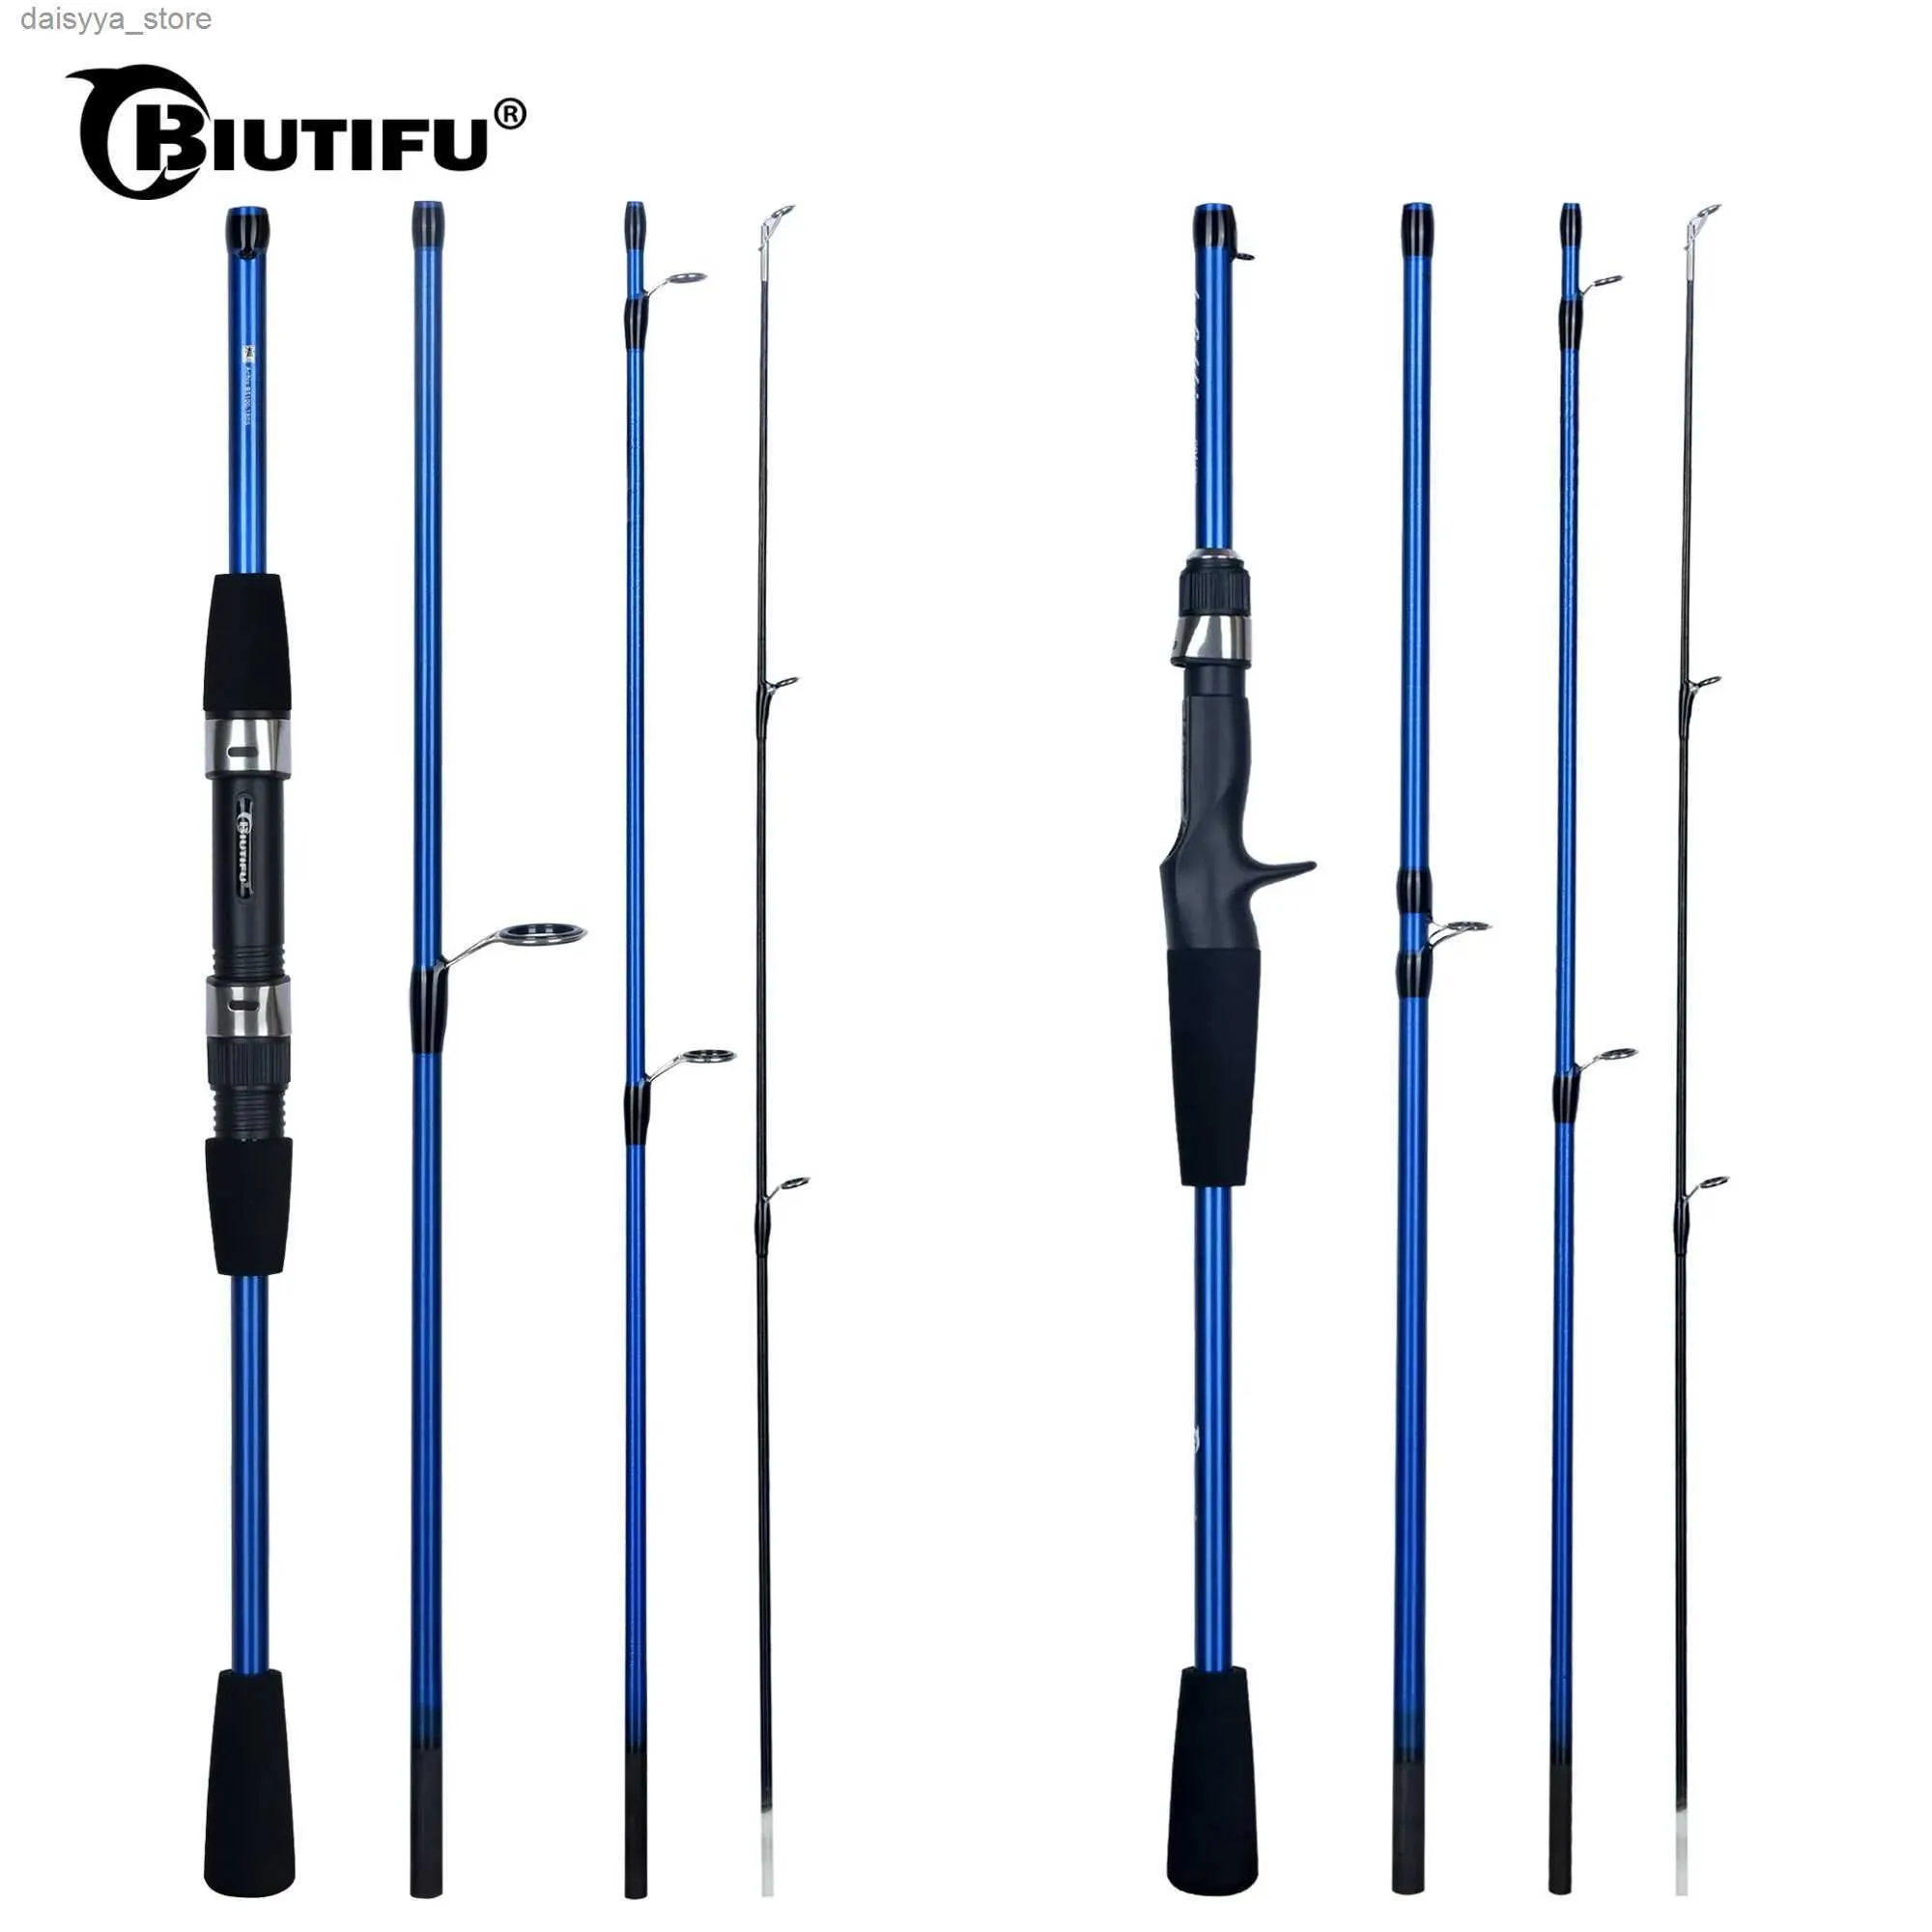 Boat Fishing Rods BIUTIFU Baitcasting Spinning Travel Carbon 4/5 Section  Fishing Rods Casting Weight 5 20g Power Ultralight Lure Trout Mini  PoleL23118 From Daisyya_store, $20.4